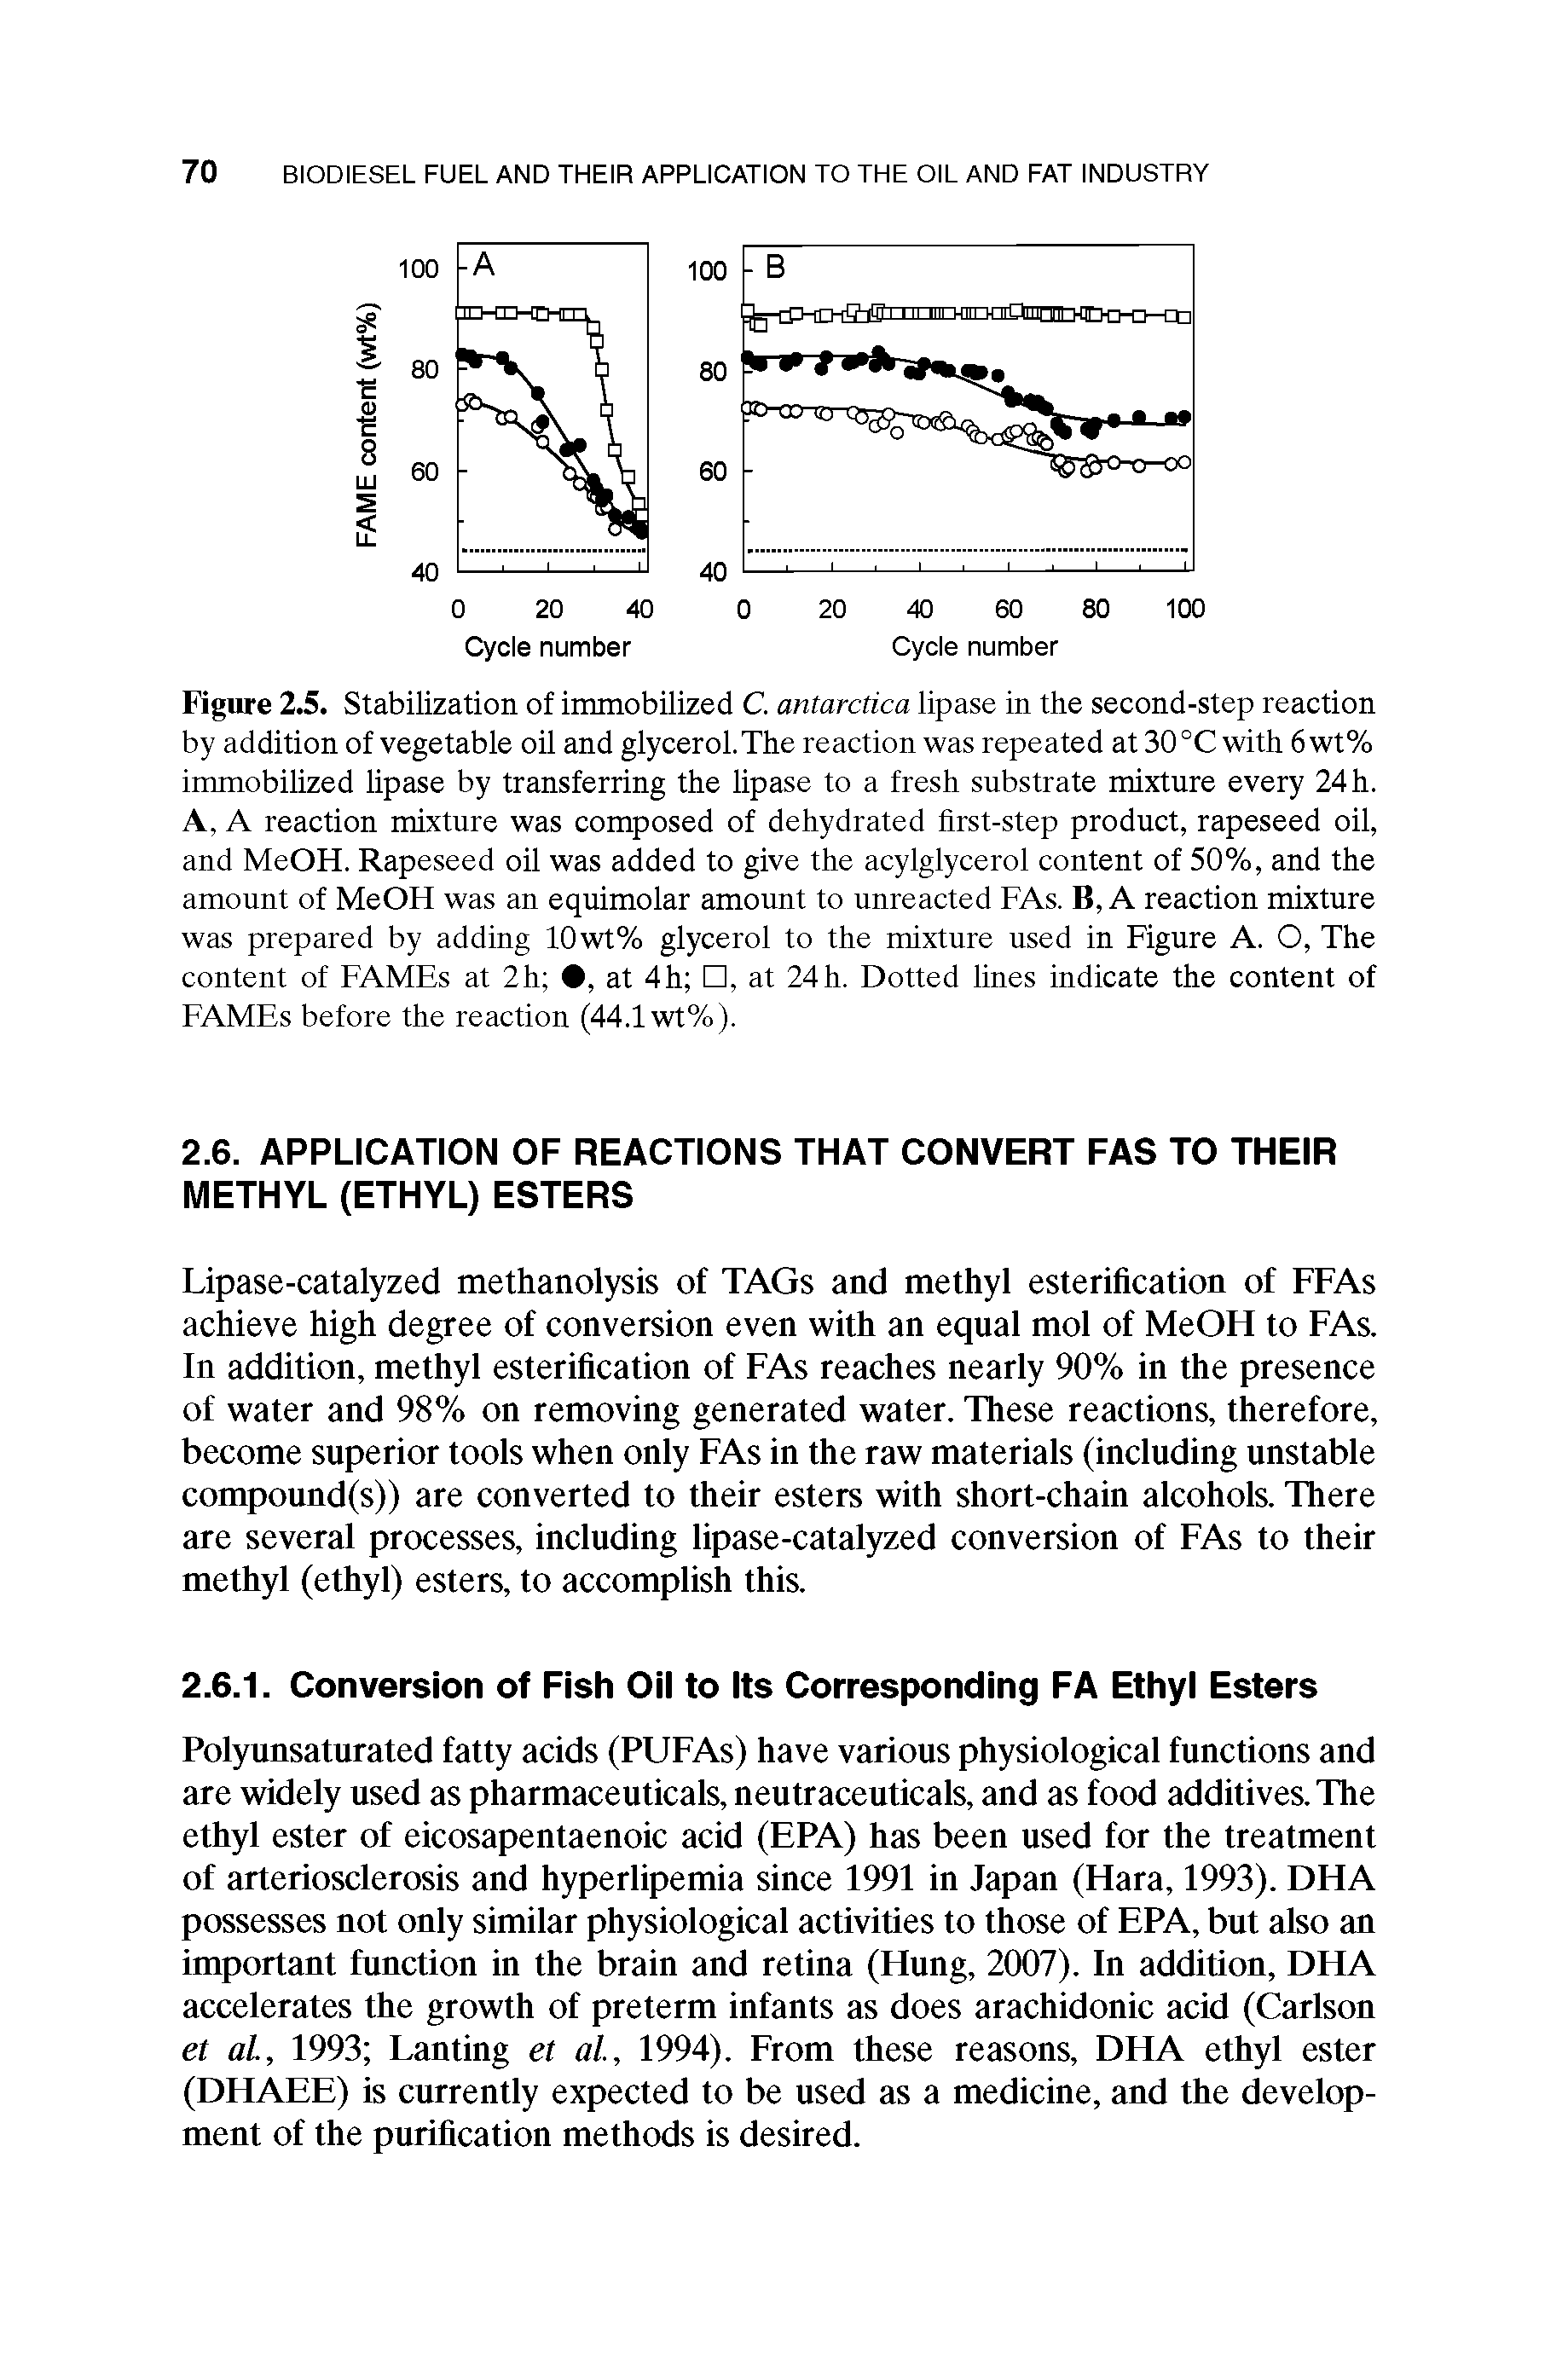 Figure 2.5. Stabilization of immobilized C. antarctica lipase in the second-step reaction by addition of vegetable oil and glycerol. The reaction was repeated at 30 °C with 6 wt% immobilized lipase by transferring the lipase to a fresh substrate mixture every 24 h. A, A reaction mixture was composed of dehydrated first-step product, rapeseed oil, and MeOH. Rapeseed oil was added to give the acylglycerol content of 50%, and the amount of MeOH was an equimolar amount to unreacted FAs. B, A reaction mixture was prepared by adding 10wt% glycerol to the mixture used in Figure A. O, The content of FAMEs at 2h , at 4h , at 24h. Dotted lines indicate the content of FAMEs before the reaction (44.1 wt%).